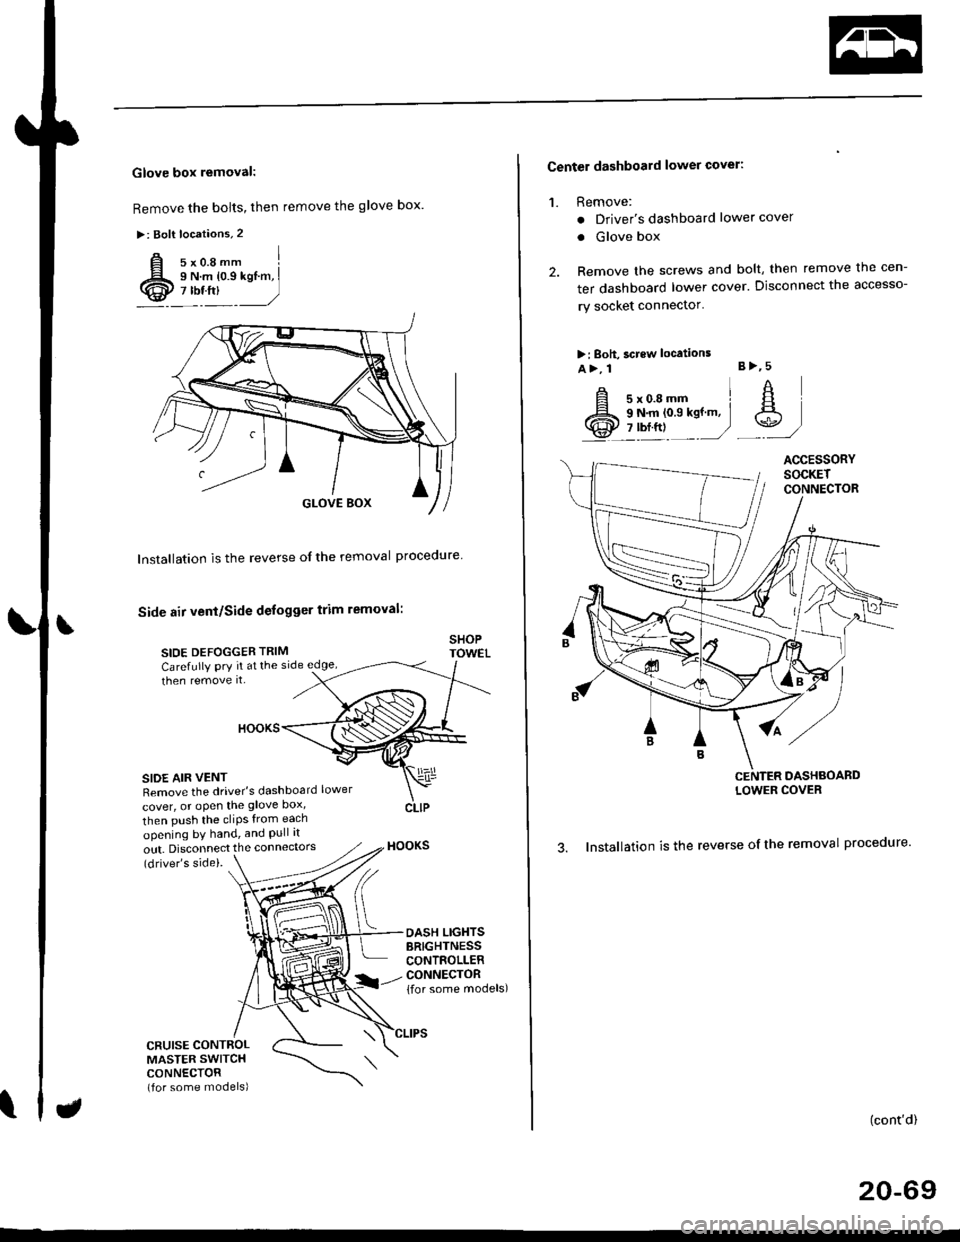 HONDA CIVIC 2000 6.G Workshop Manual Glove box removal:
Remove the bolts, then remove the glove box.
>: Bolt locations,2
Installation is the reverse of the removal proceoure
Side air vent/Side defogger trim removal:
SIOE DEFOGGER TRIMSHO